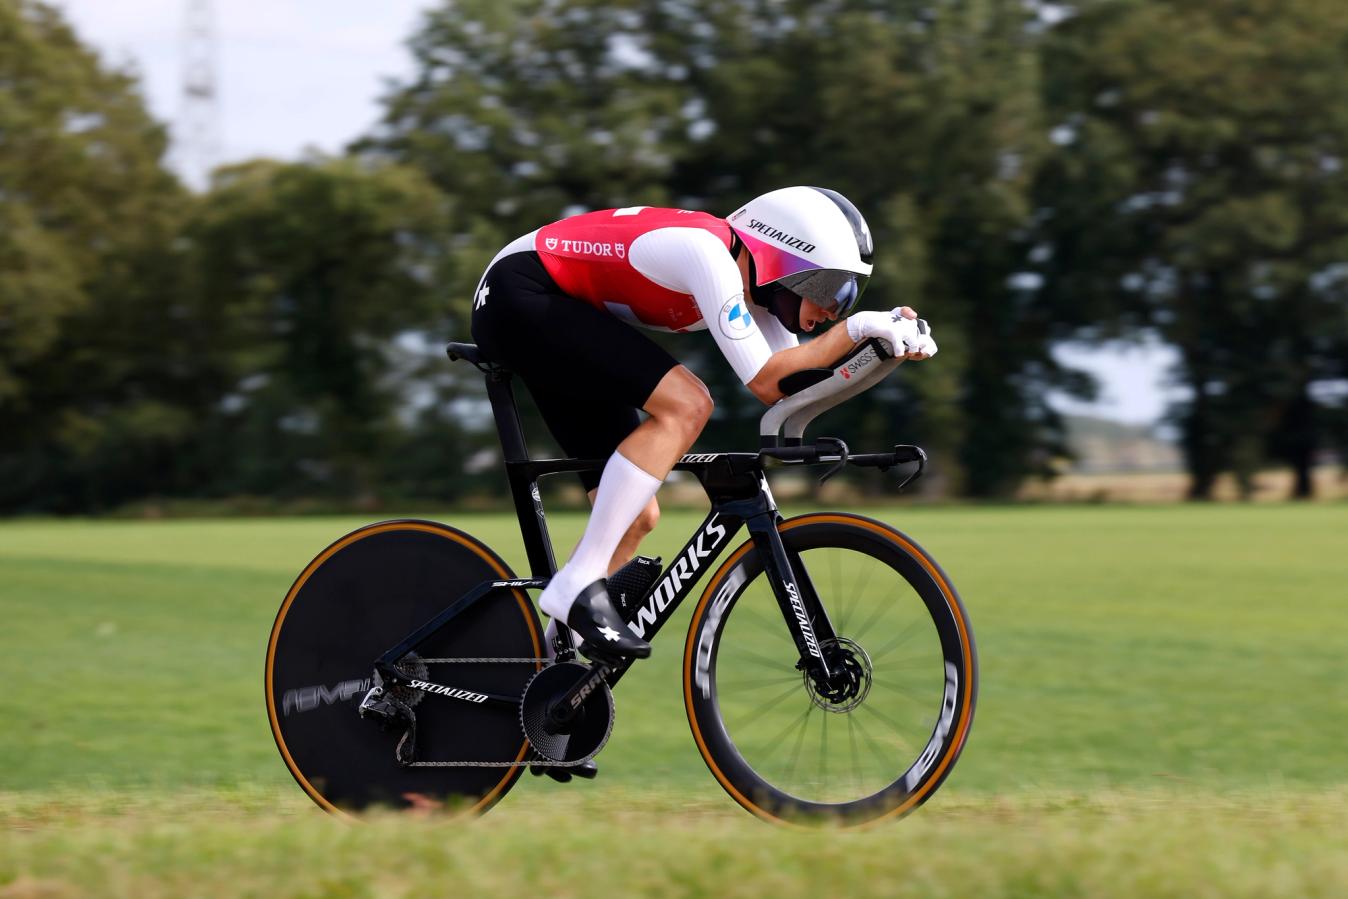 Reusser's dominance in the individual time trial at the European Championsips continued